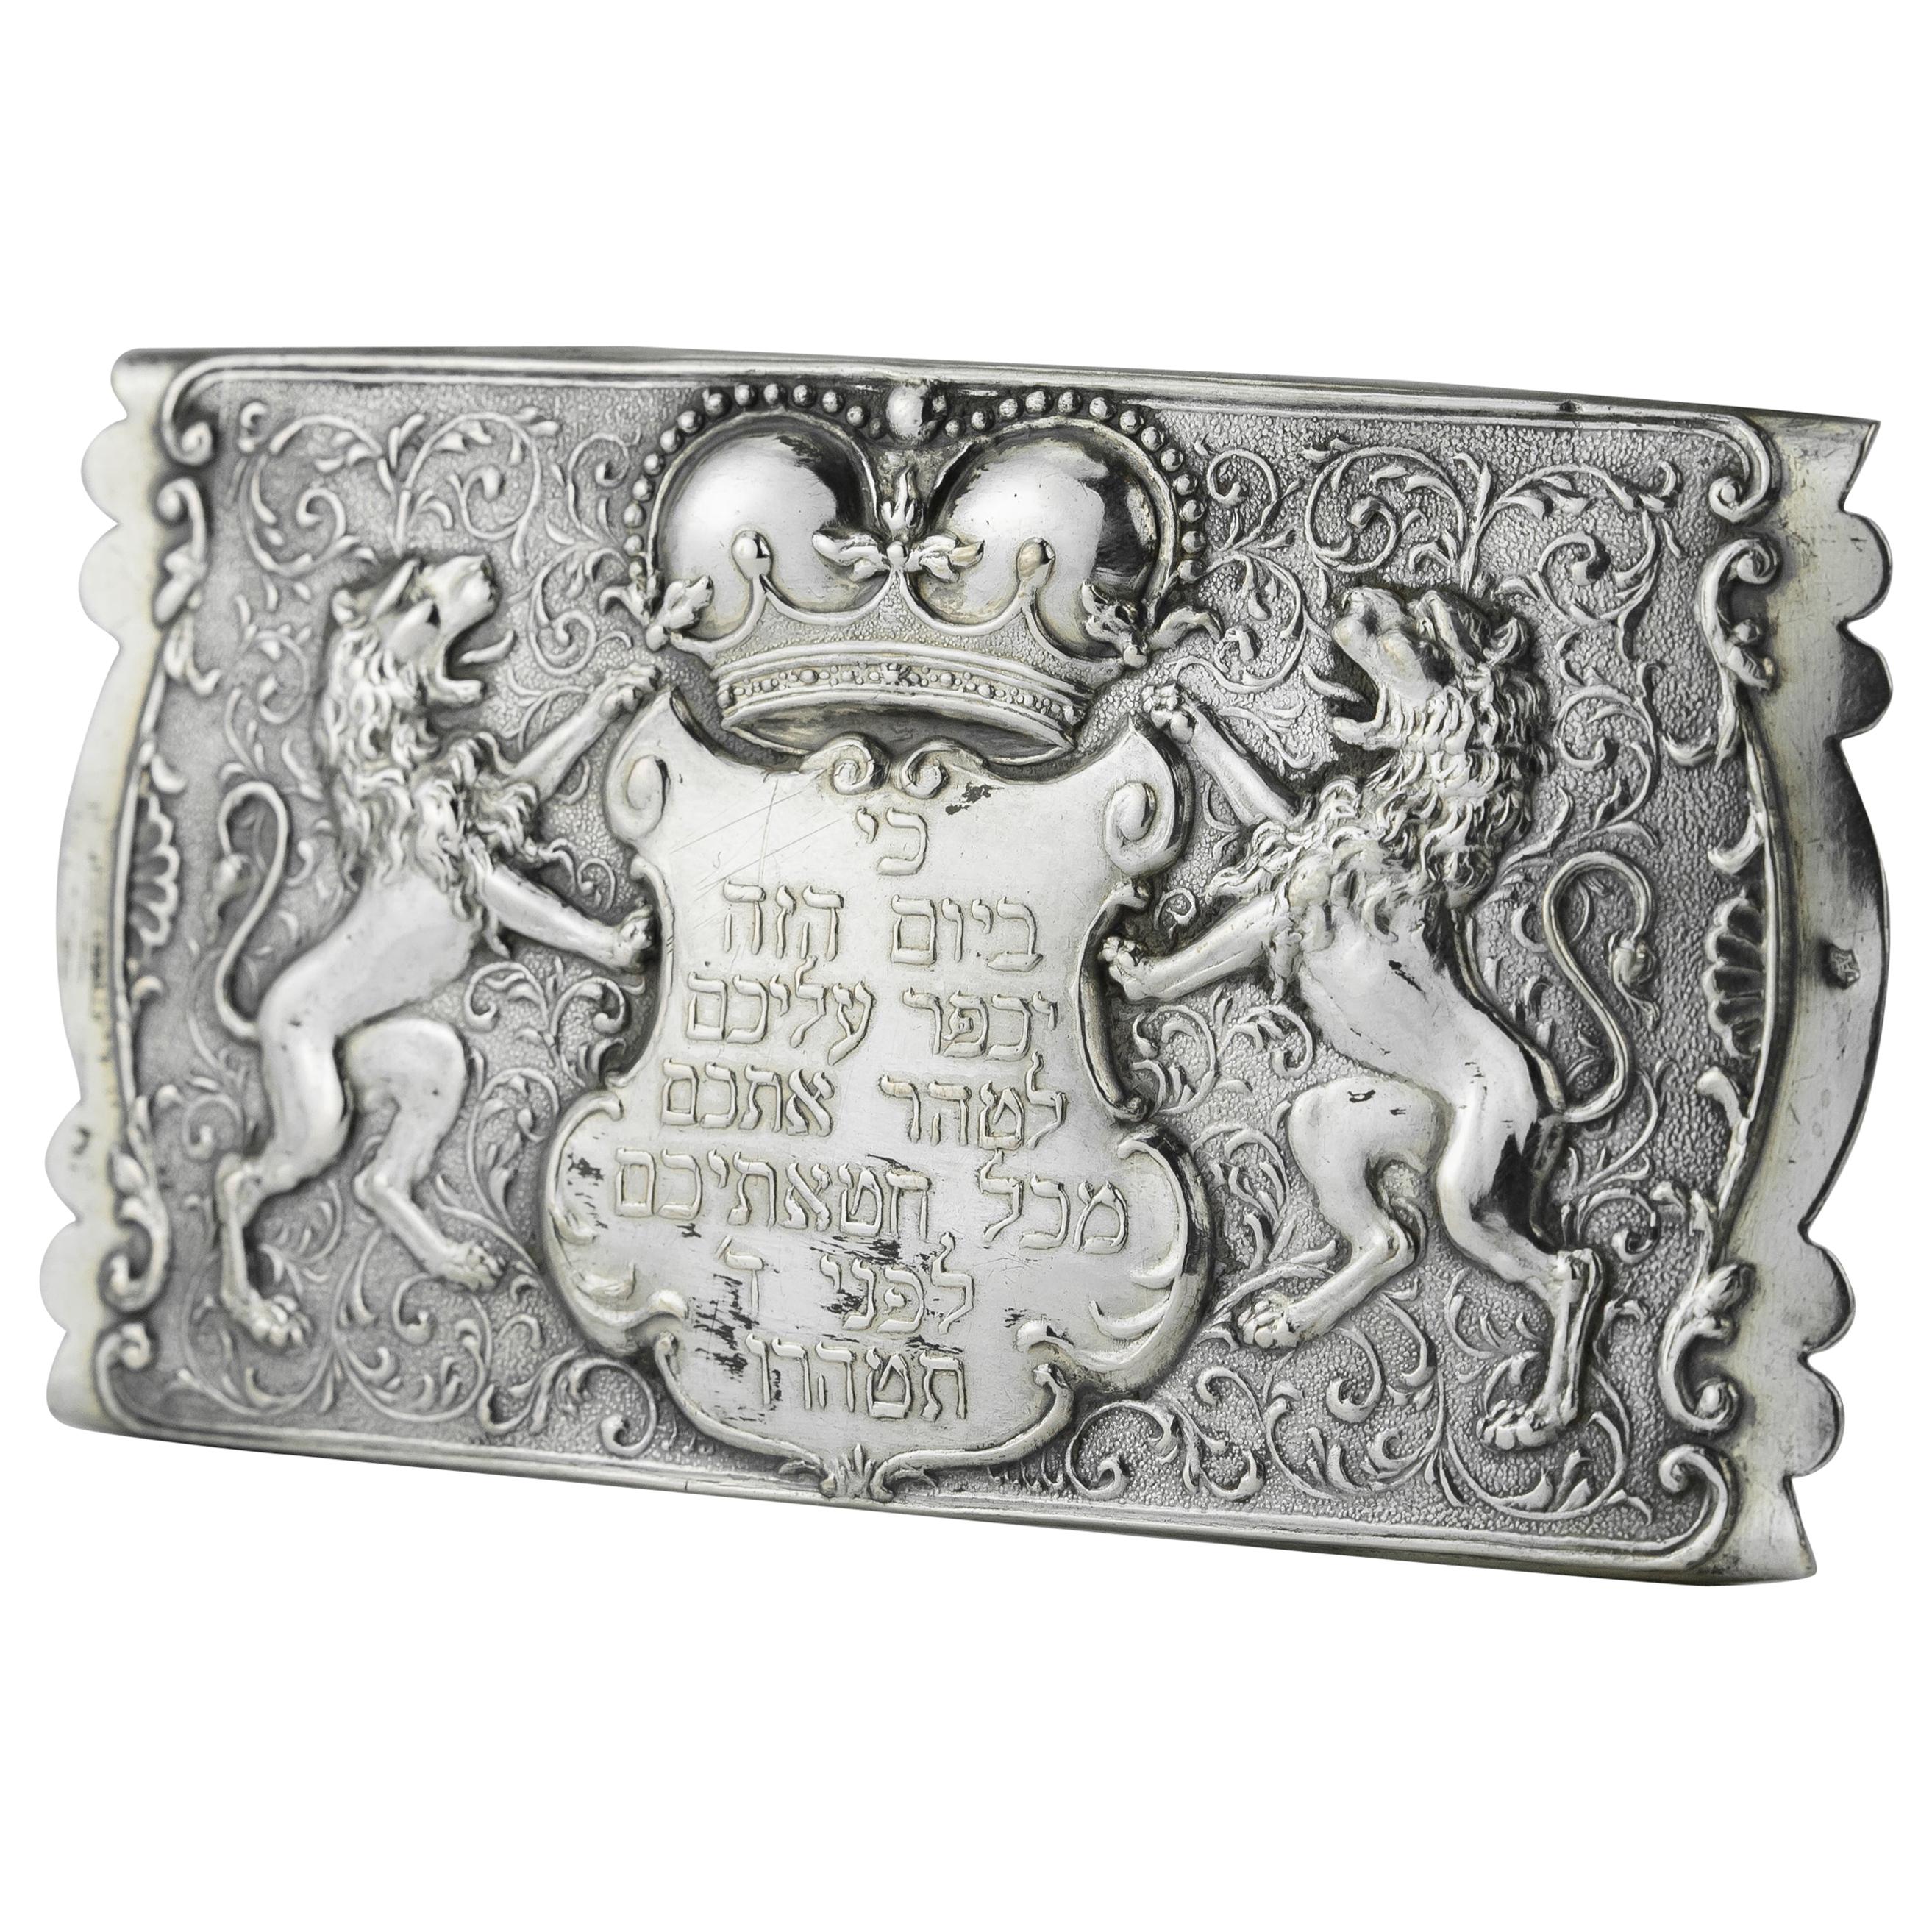 Late 19th Century Austro-Hungarian Silver Yom Kippur Belt Buckle For Sale